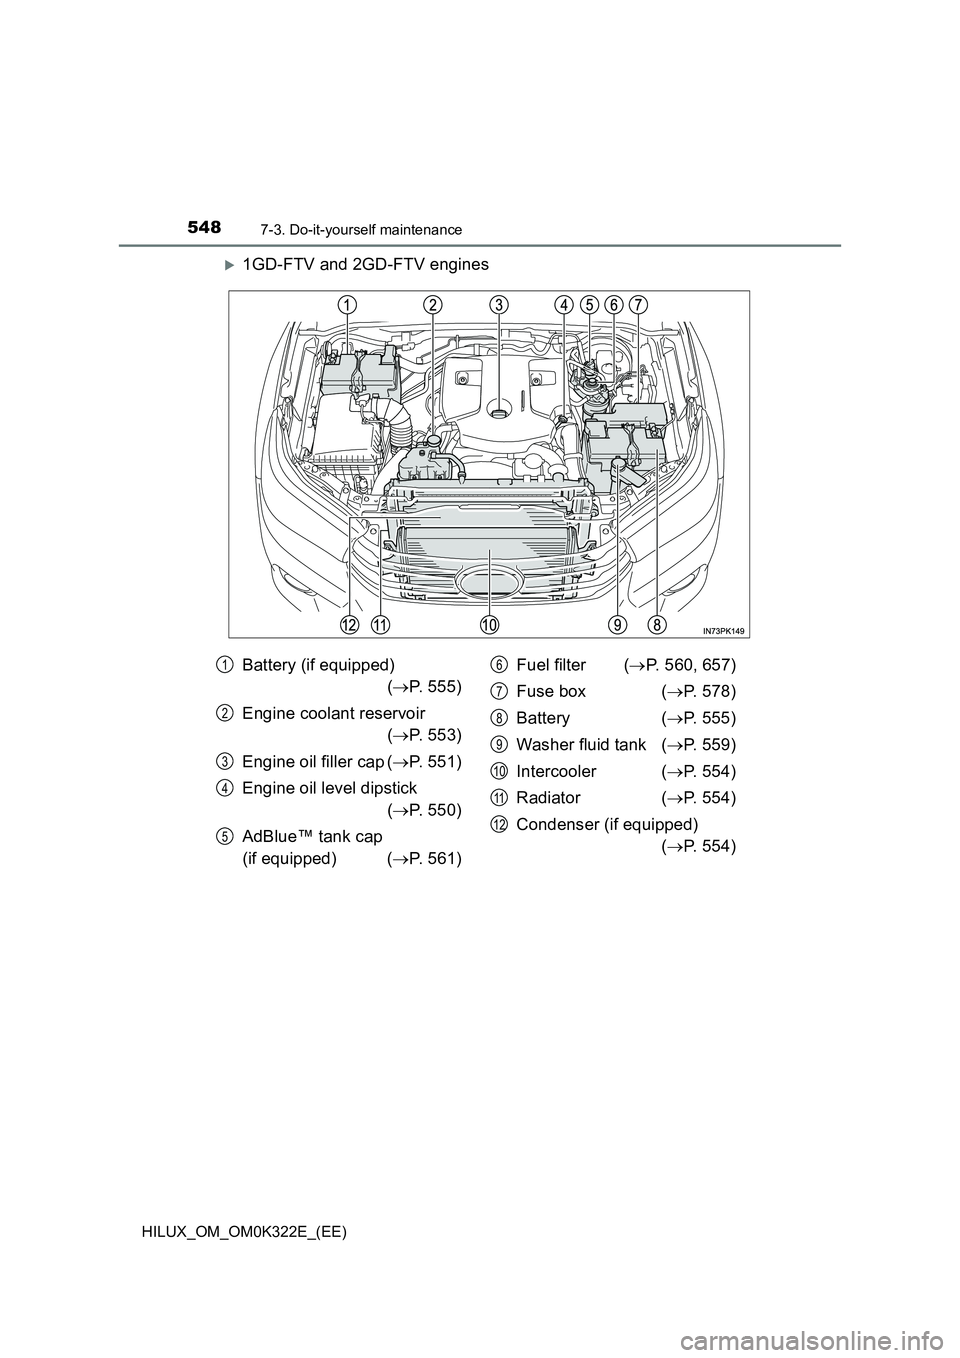 TOYOTA HILUX 2017  Owners Manual (in English) 5487-3. Do-it-yourself maintenance
HILUX_OM_OM0K322E_(EE)
1GD-FTV and 2GD-FTV engines
Battery (if equipped) 
 ( P. 555) 
Engine coolant reservoir  
( P. 553) 
Engine oil filler cap ( P. 55